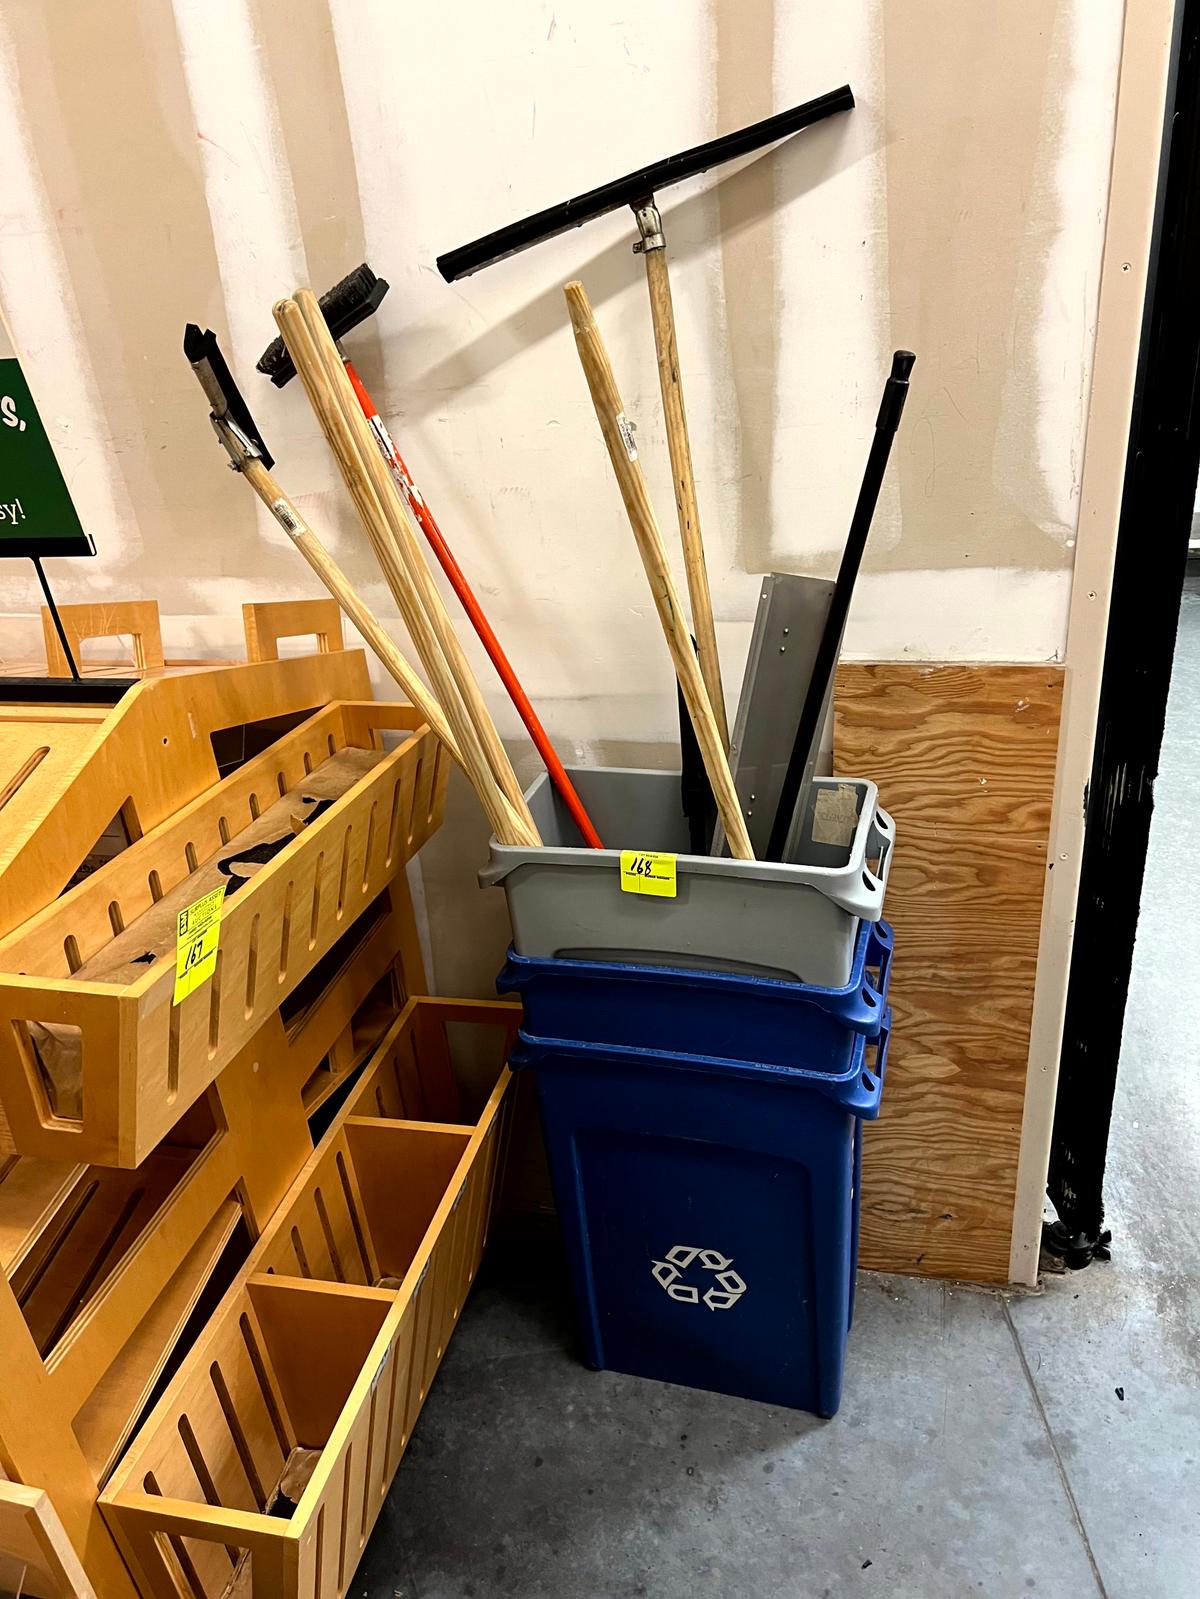 Group of Trash Cans and Janitorial Supplies